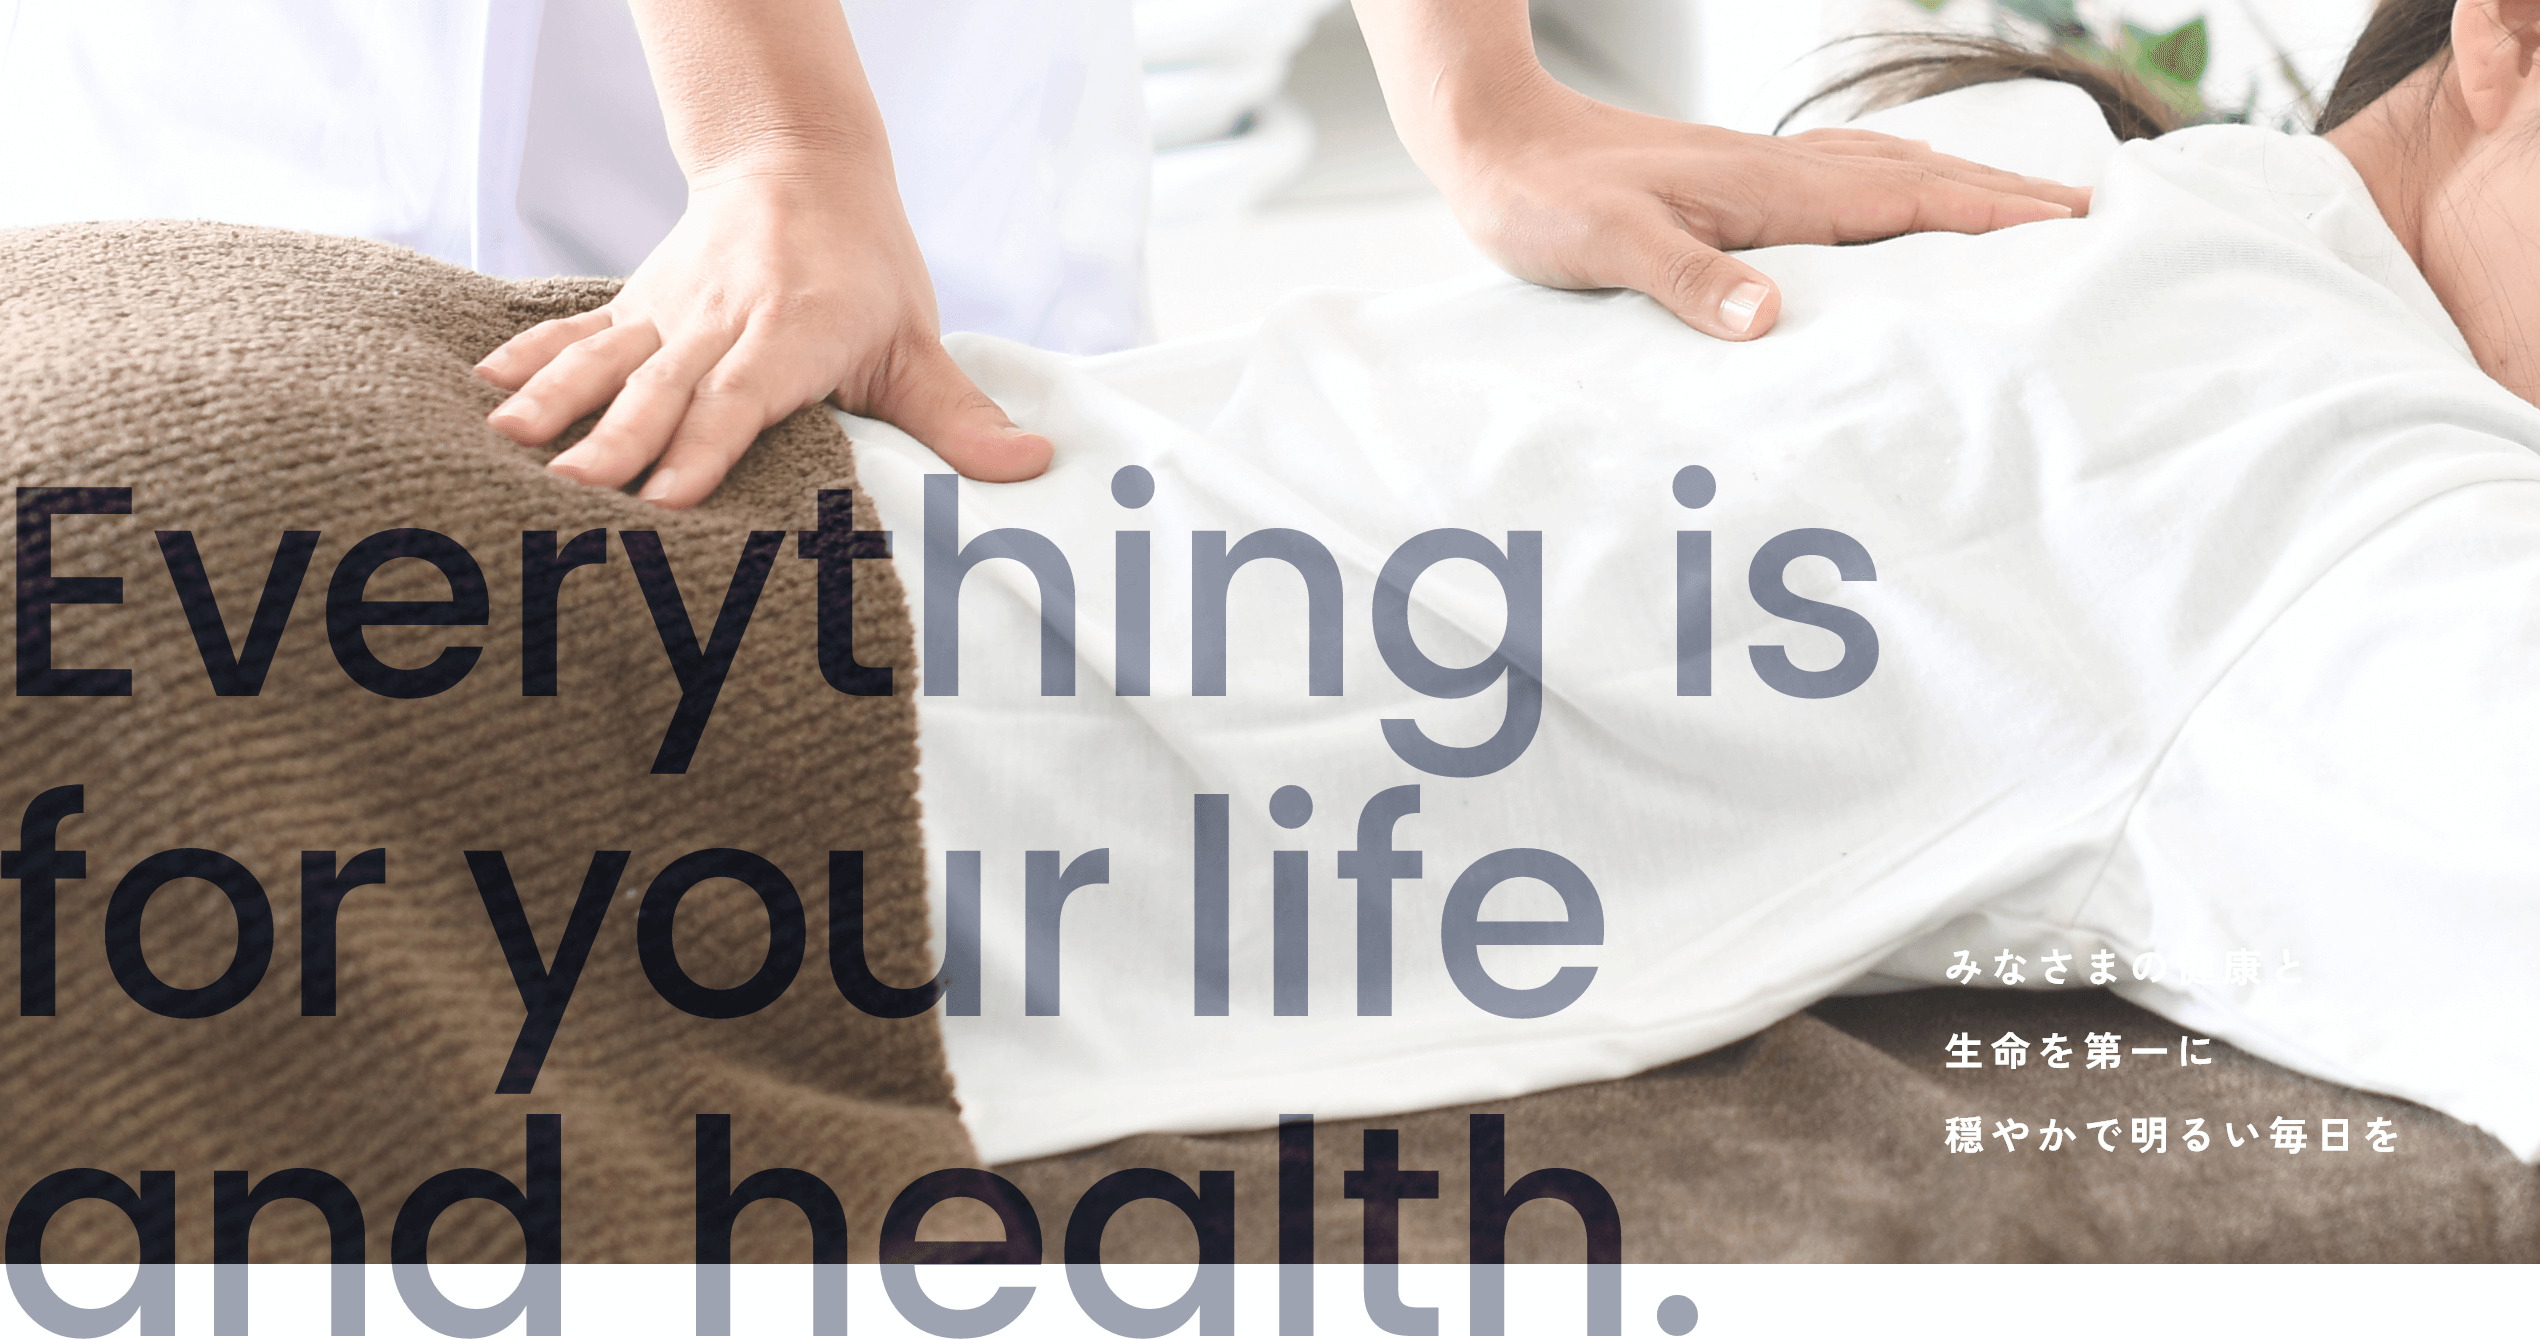 Everything is for your life and health.